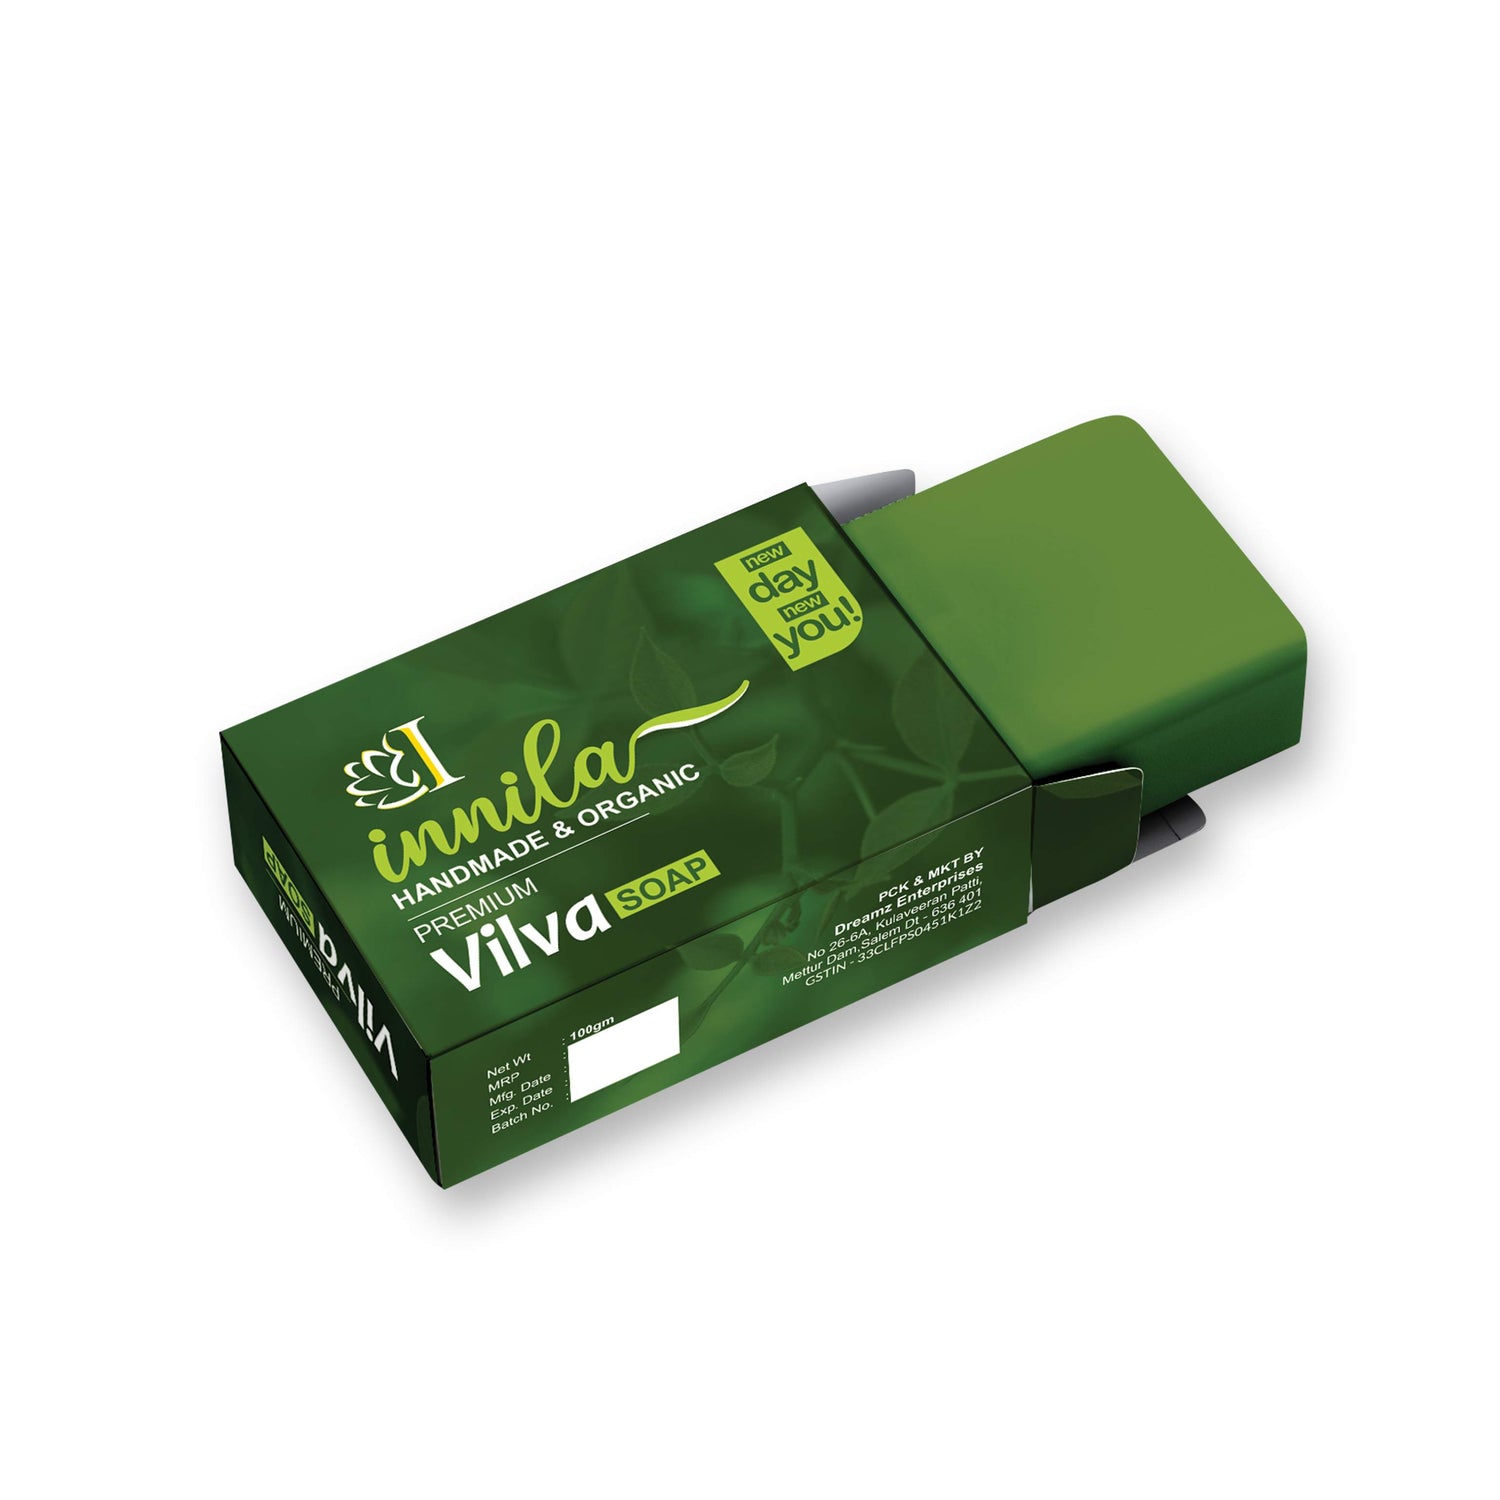 Innila Premium Vilvah Handmade Glycerin Soap | Infused With Vilva, Tulasi Leaves Extract & Kojic Acid For Skin Glow - 100GM (First Ever Product Made In India With Sacred Bilva/Vilva Leaf Extract)